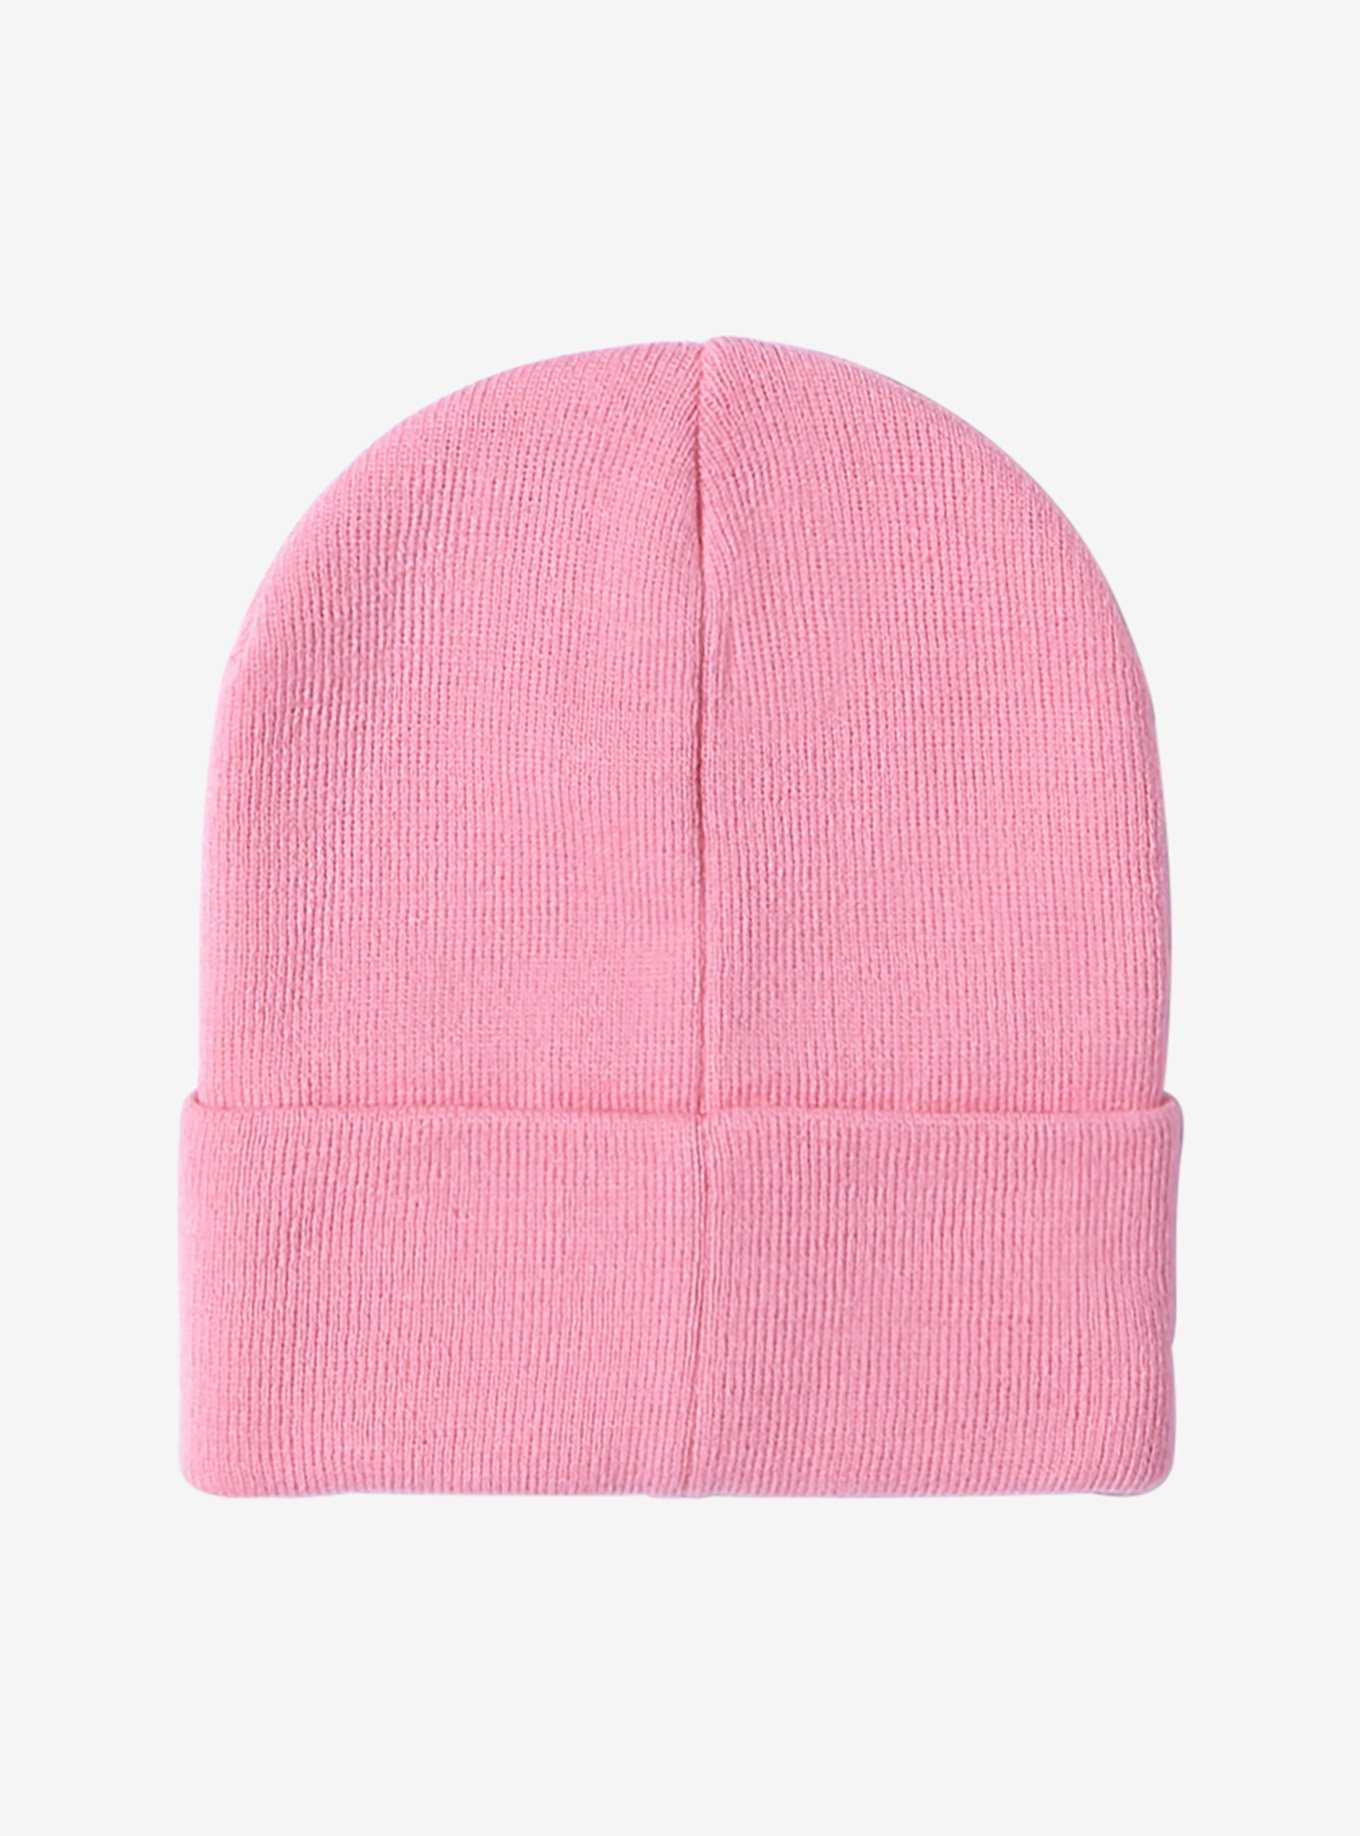 Nintendo Kirby Face Pink Beanie, , hi-res